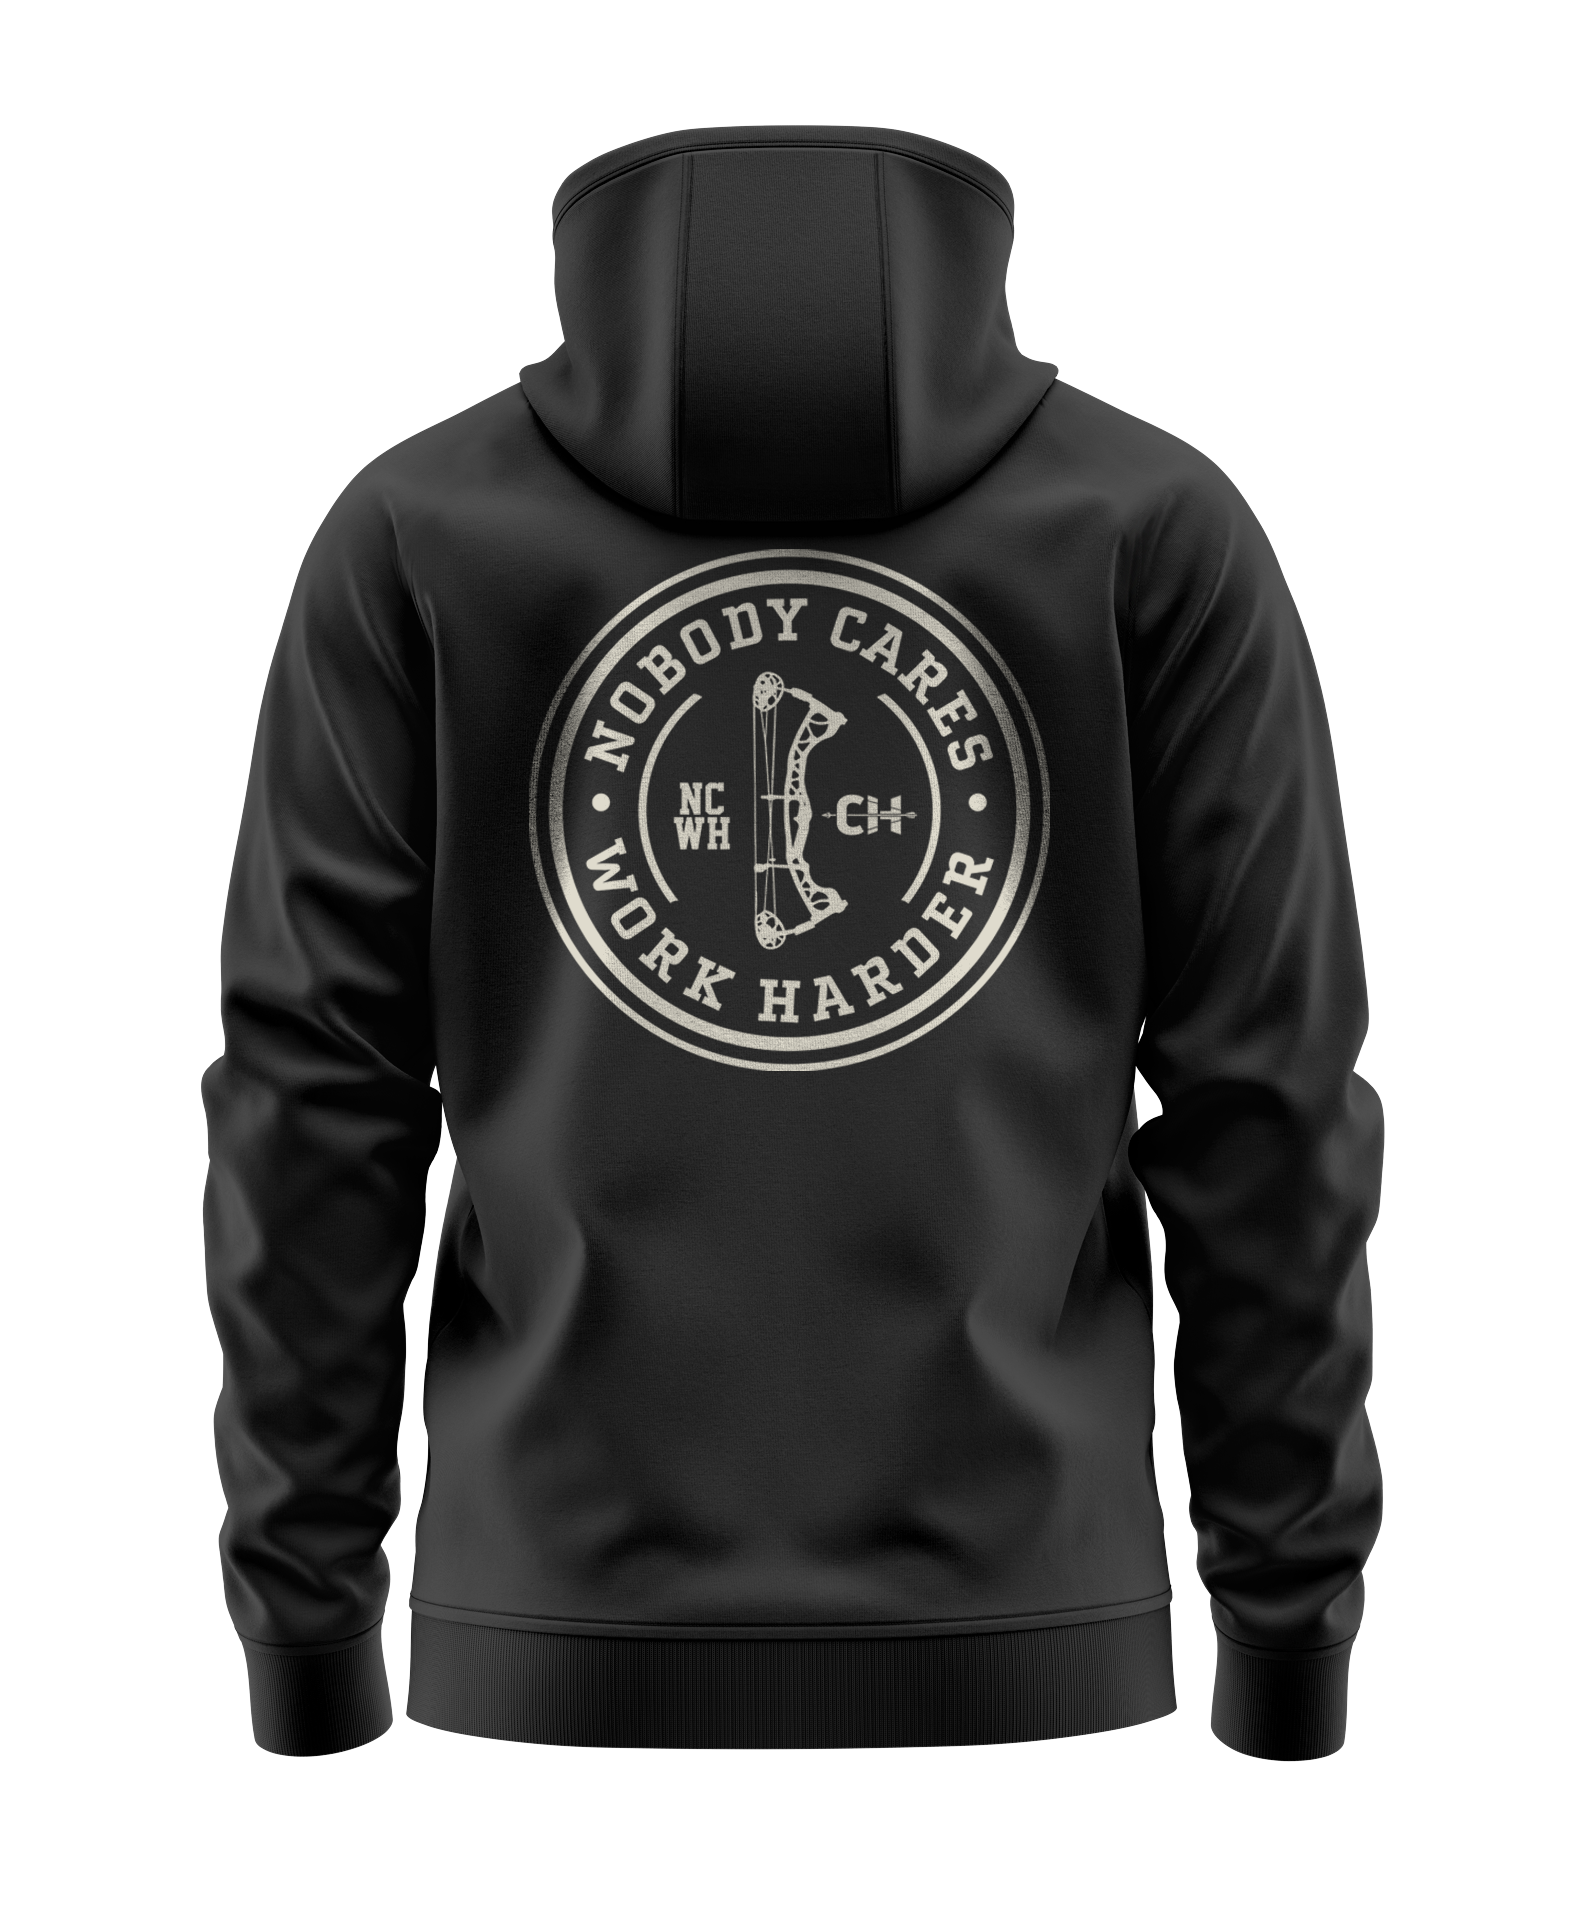 Nobody Cares Work Harder Bow Seal Hoodie – Cameron Hanes